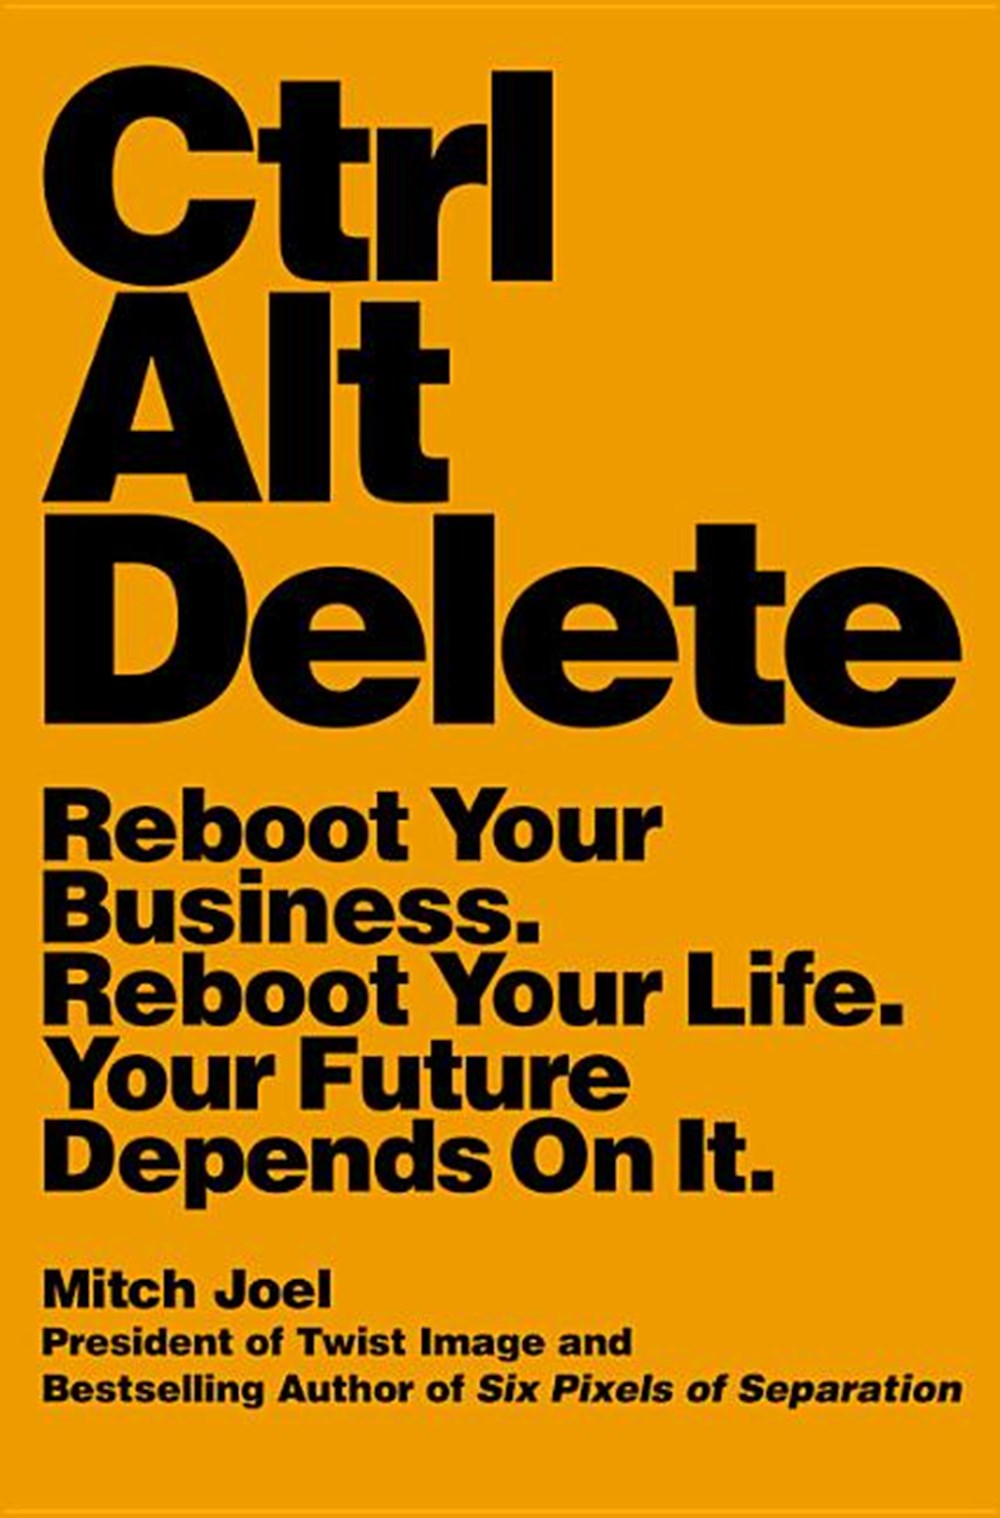 Ctrl Alt Delete: Reboot Your Business. Reboot Your Life. Your Future Depends on It.